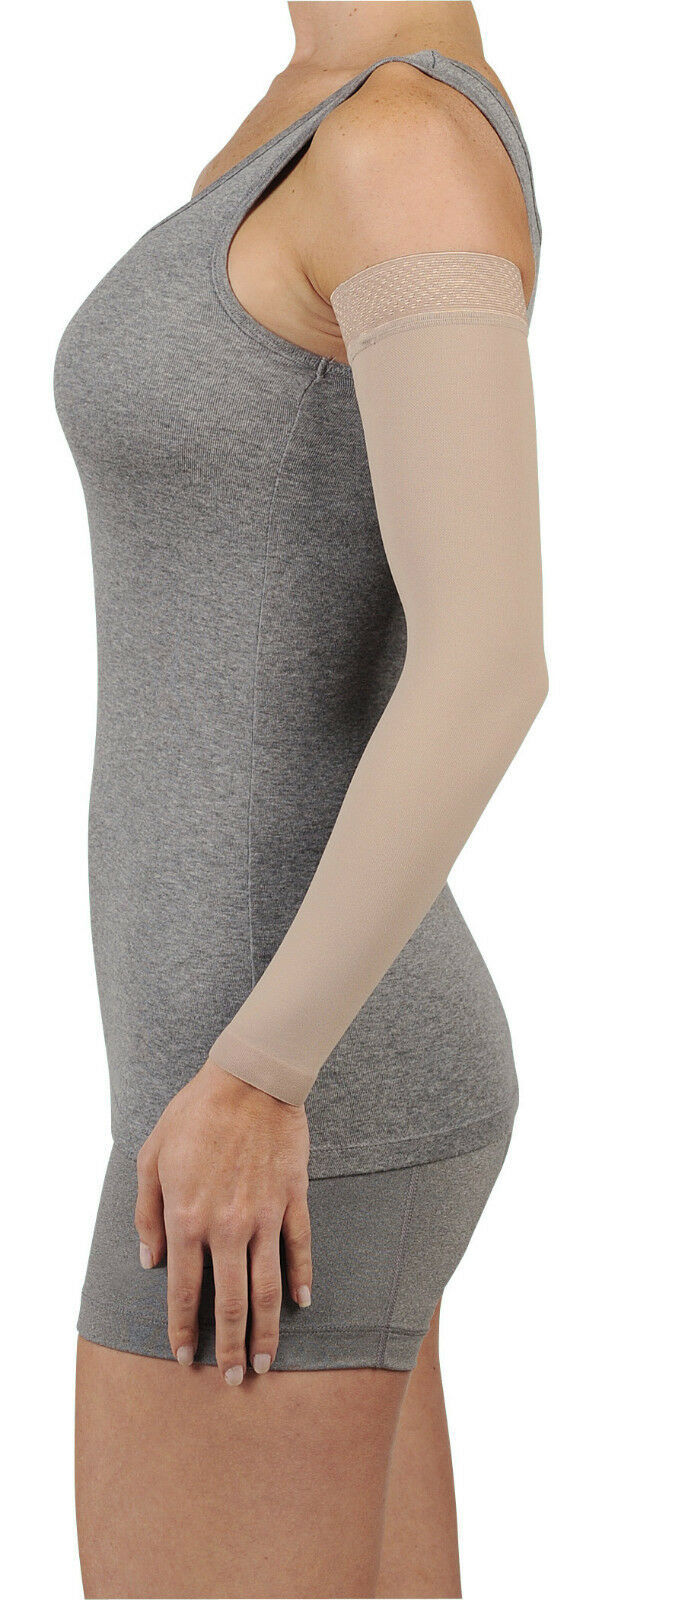 DREAMSLEEVE COMPRESSION SLEEVE by Juzo, BEIGE, Gauntlet Option, Any Level/Size